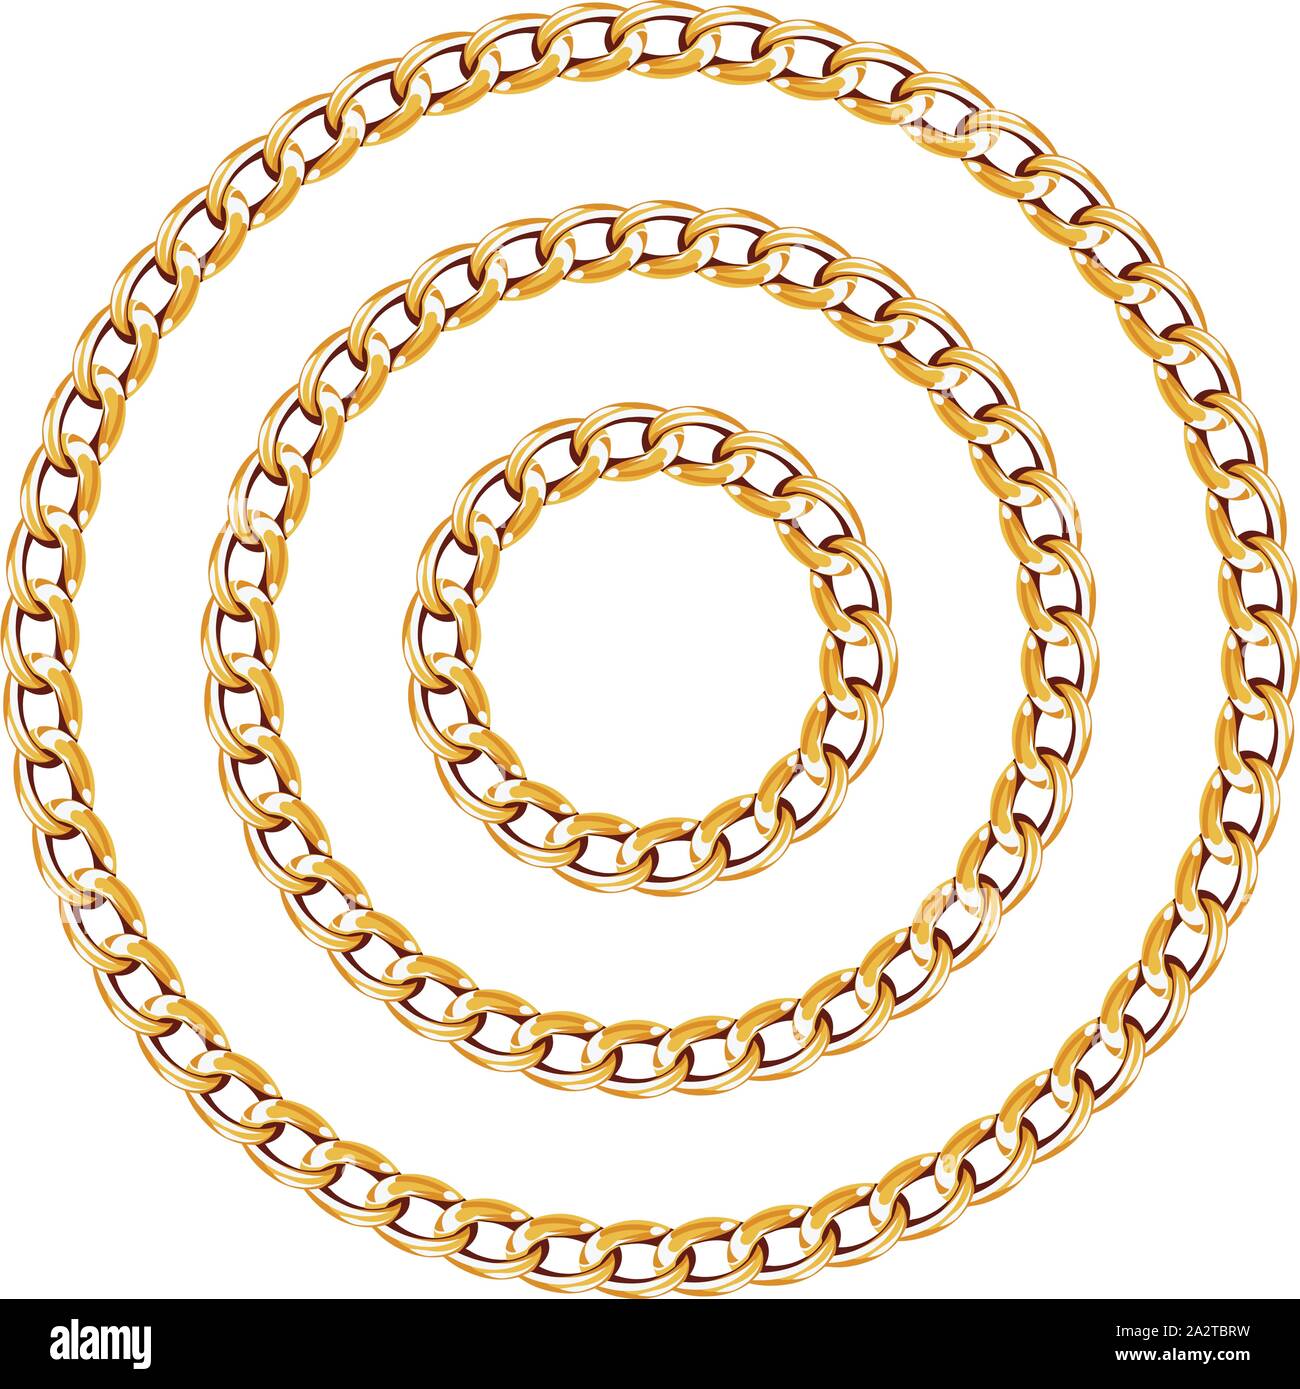 Precious Chains with a White Background. Luxury Circle Chains Vector Illustration. Ready for Textile Print. Stock Vector